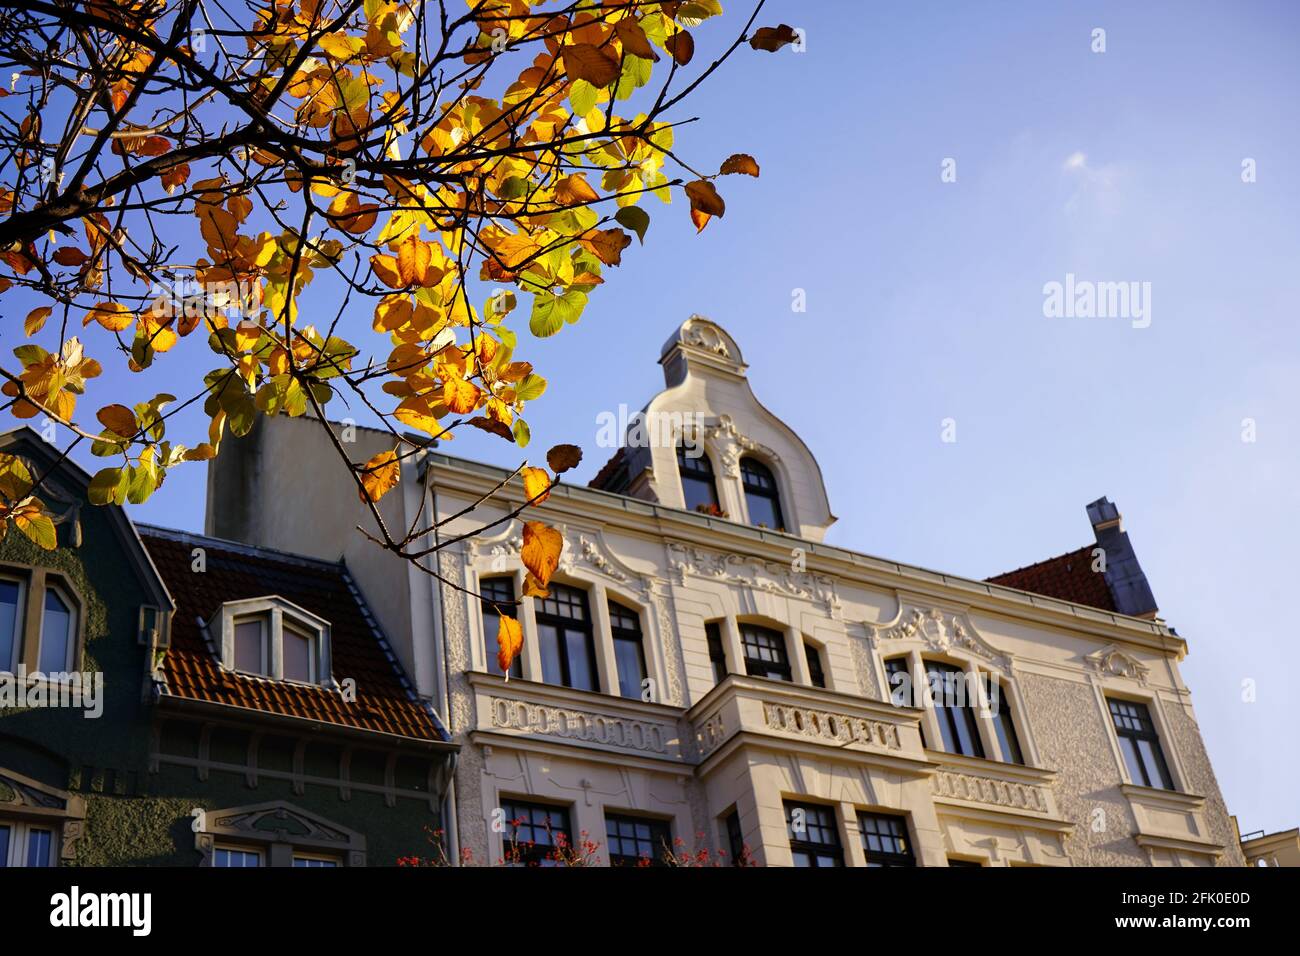 Facade of a private house in Düsseldorf, district of Oberkassel, with autumn tree in front. This district is located near Rhine river. Stock Photo